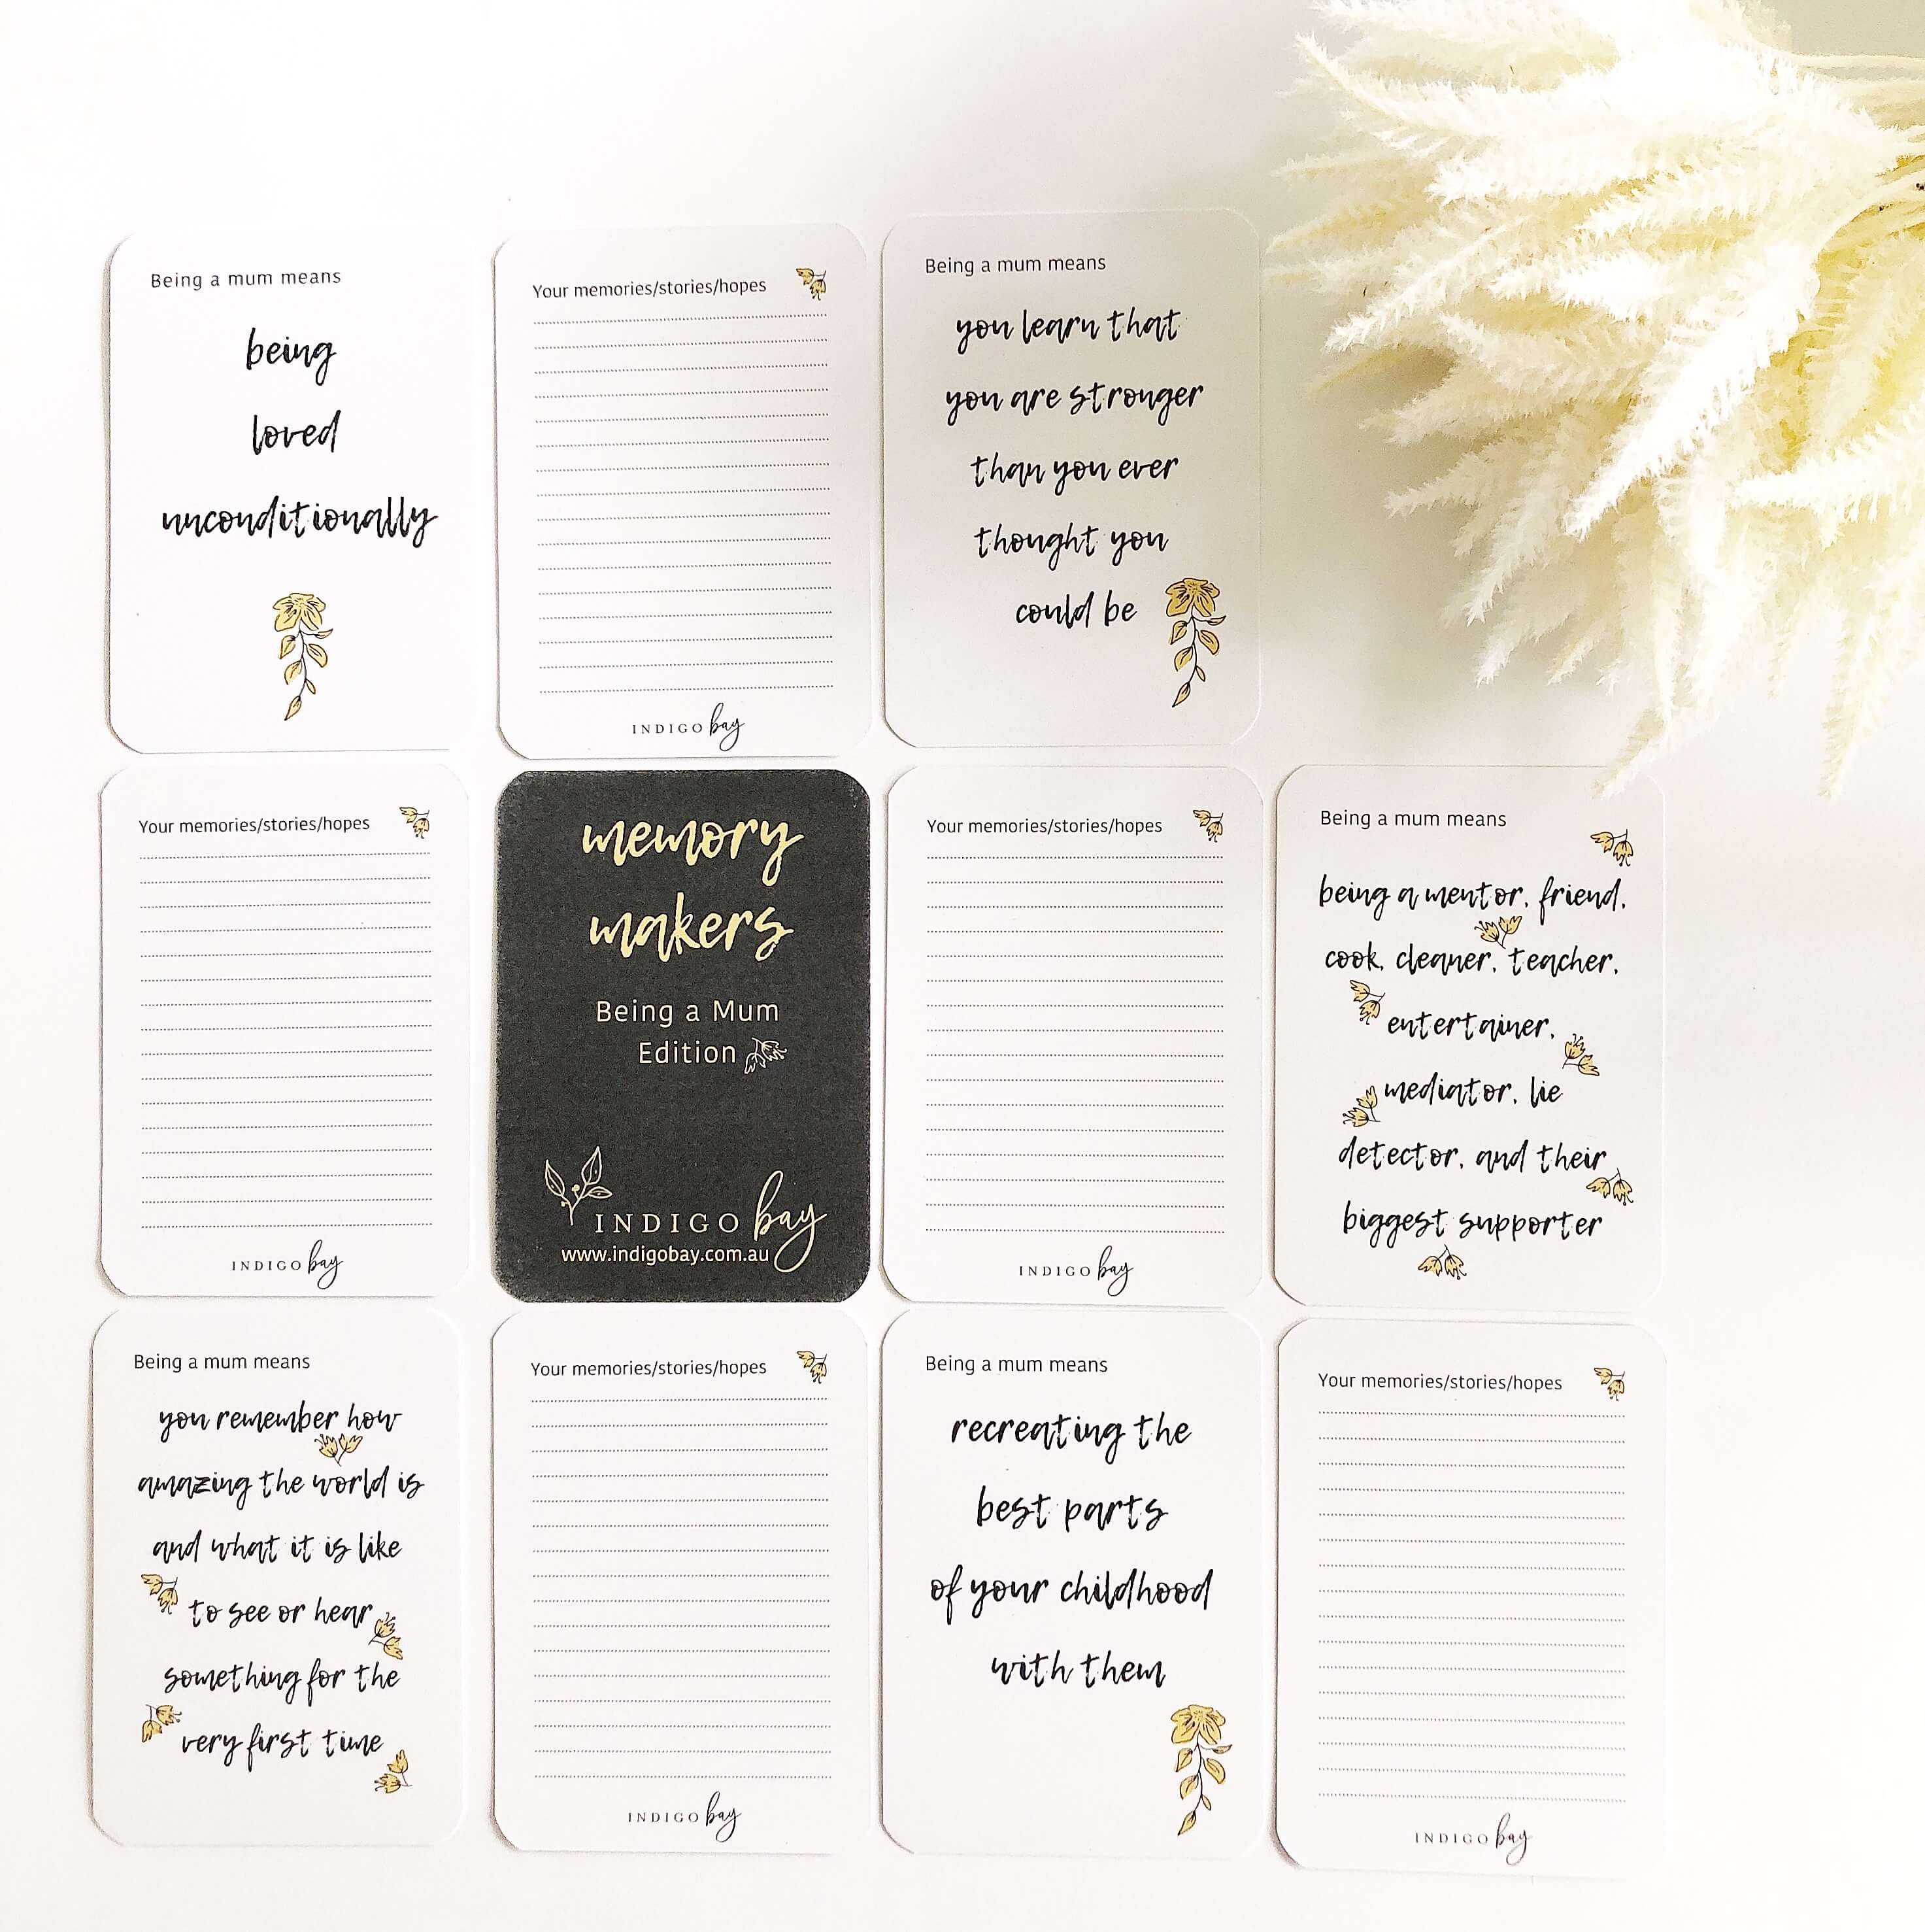 Memory Makers Being a Mum Edition - sample of cards | Indigo Bay